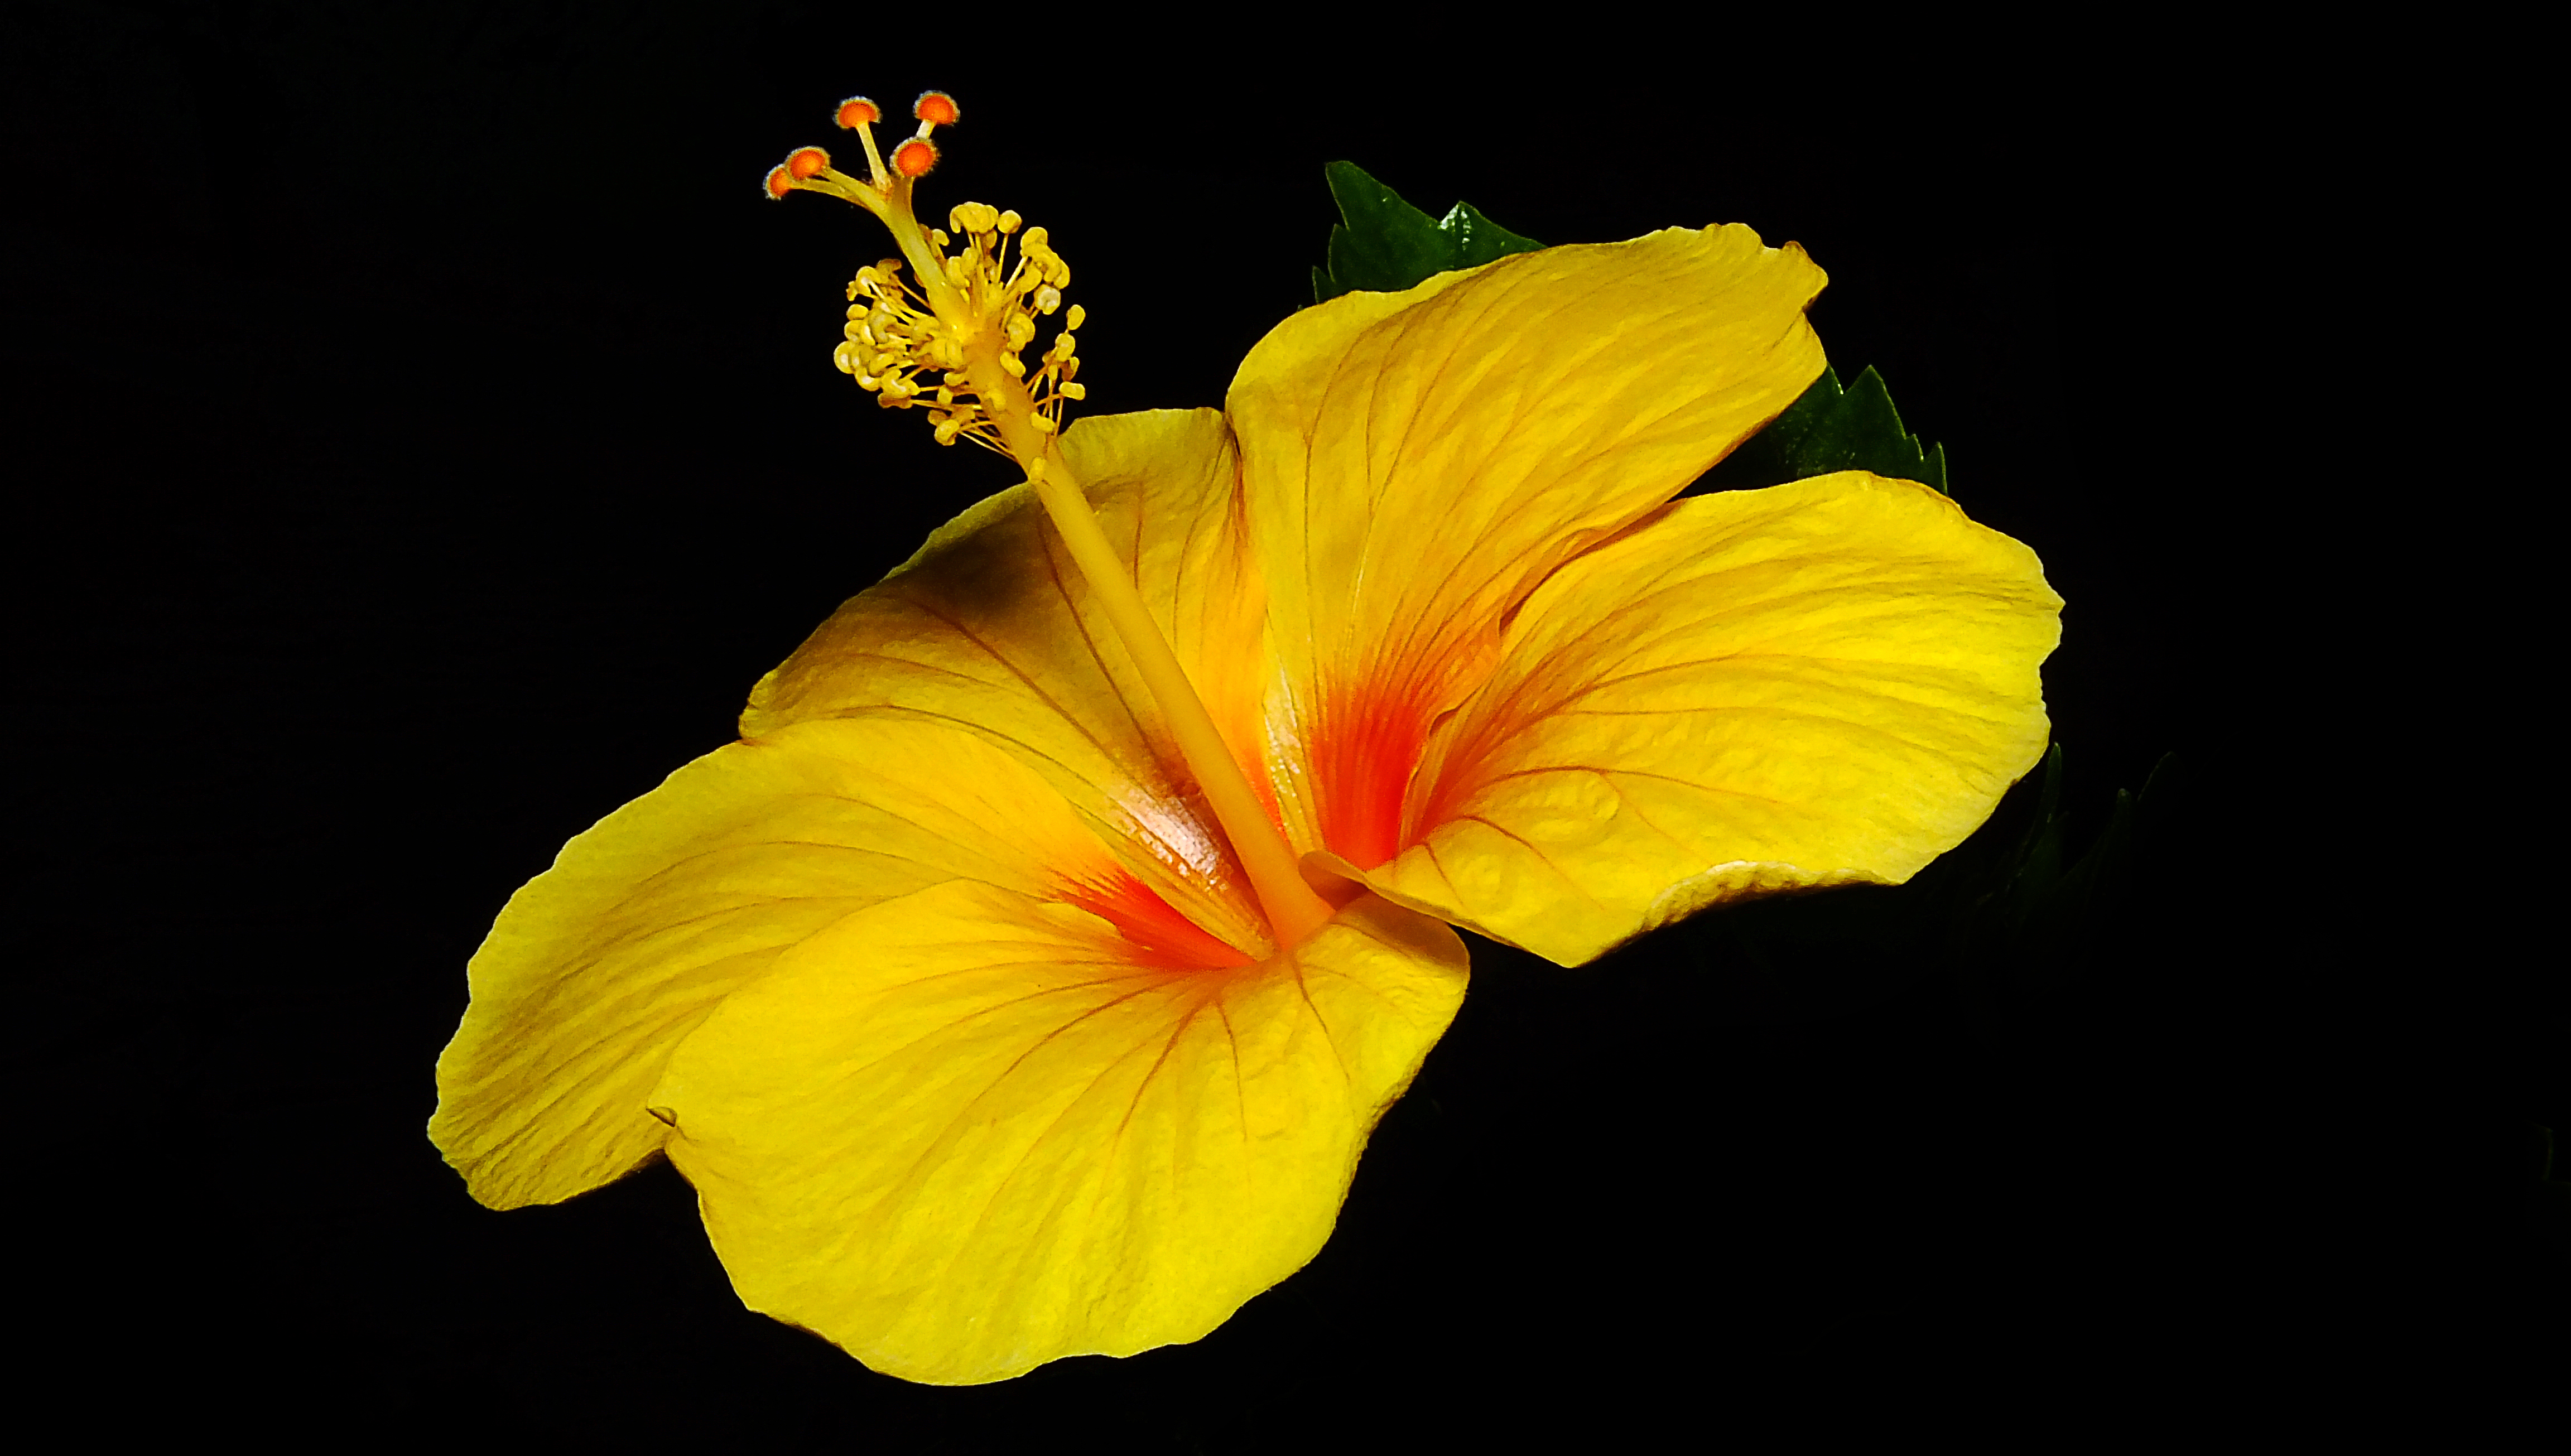 Earth Flower Hibiscus Yellow Flower 4608x2610